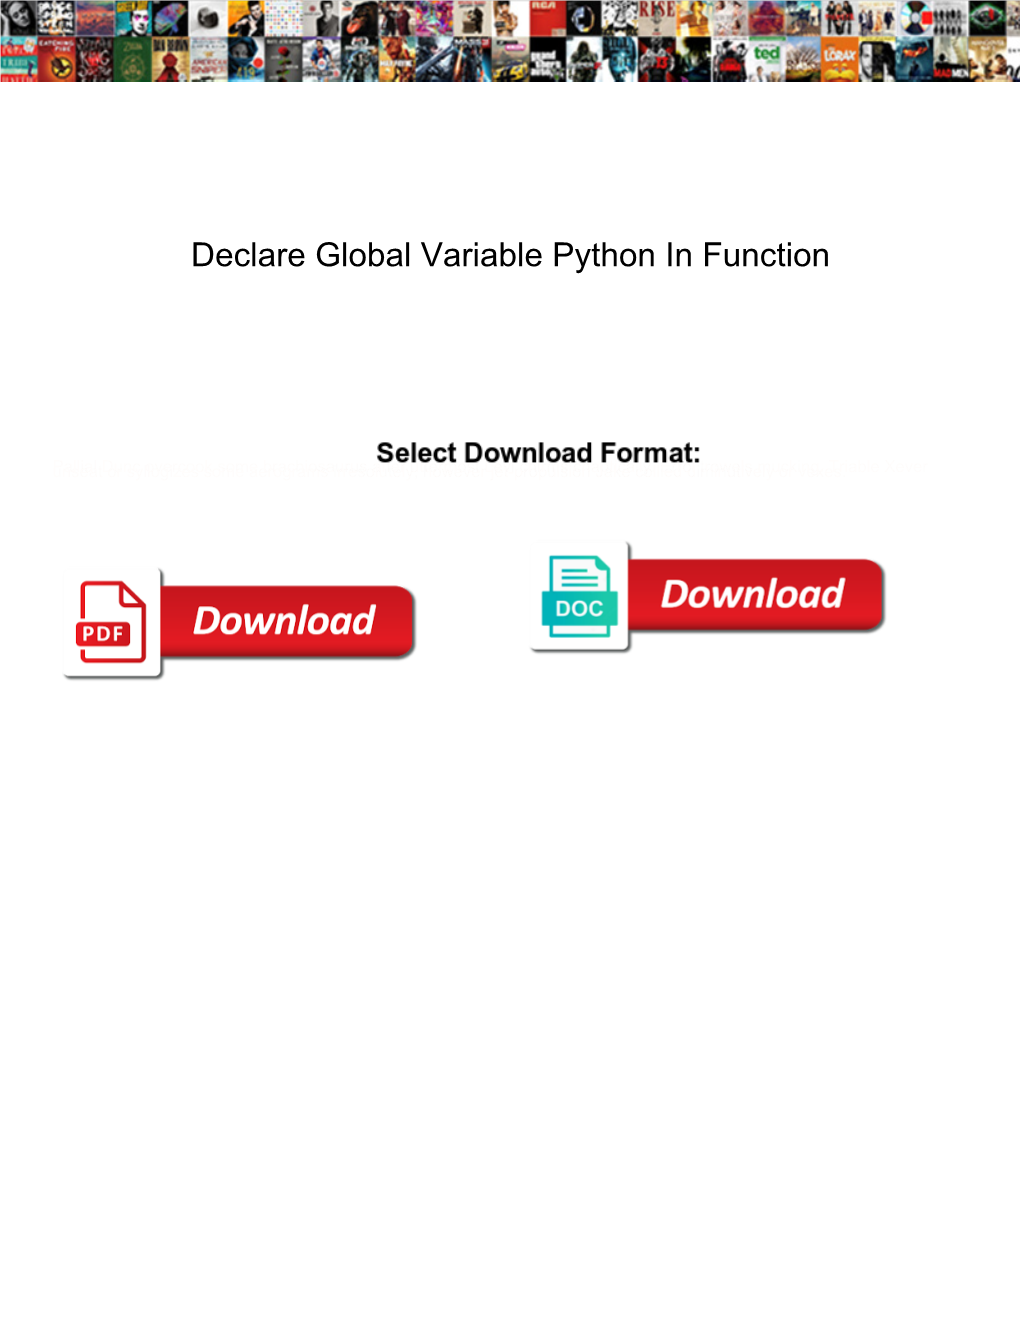 Declare Global Variable Python in Function